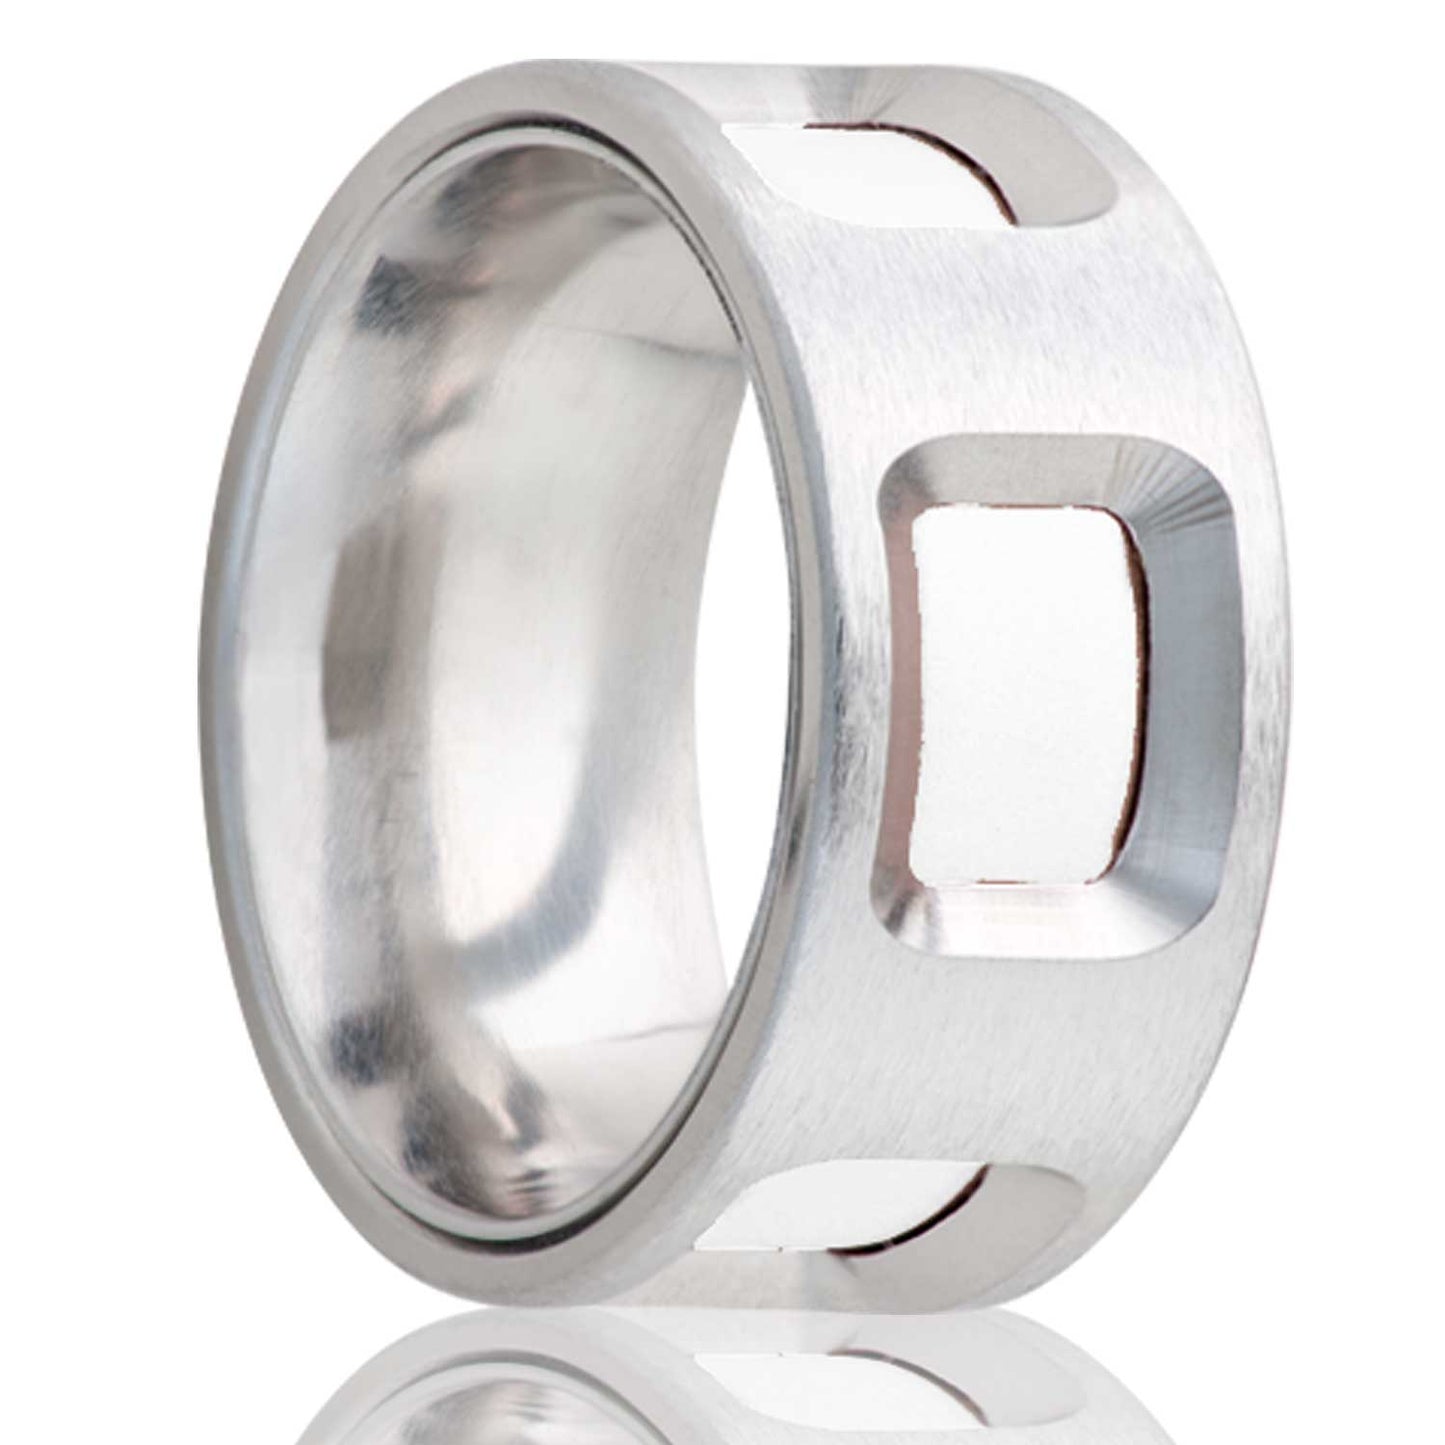 A cobalt men's wedding band with argentium silver inlays displayed on a neutral white background.